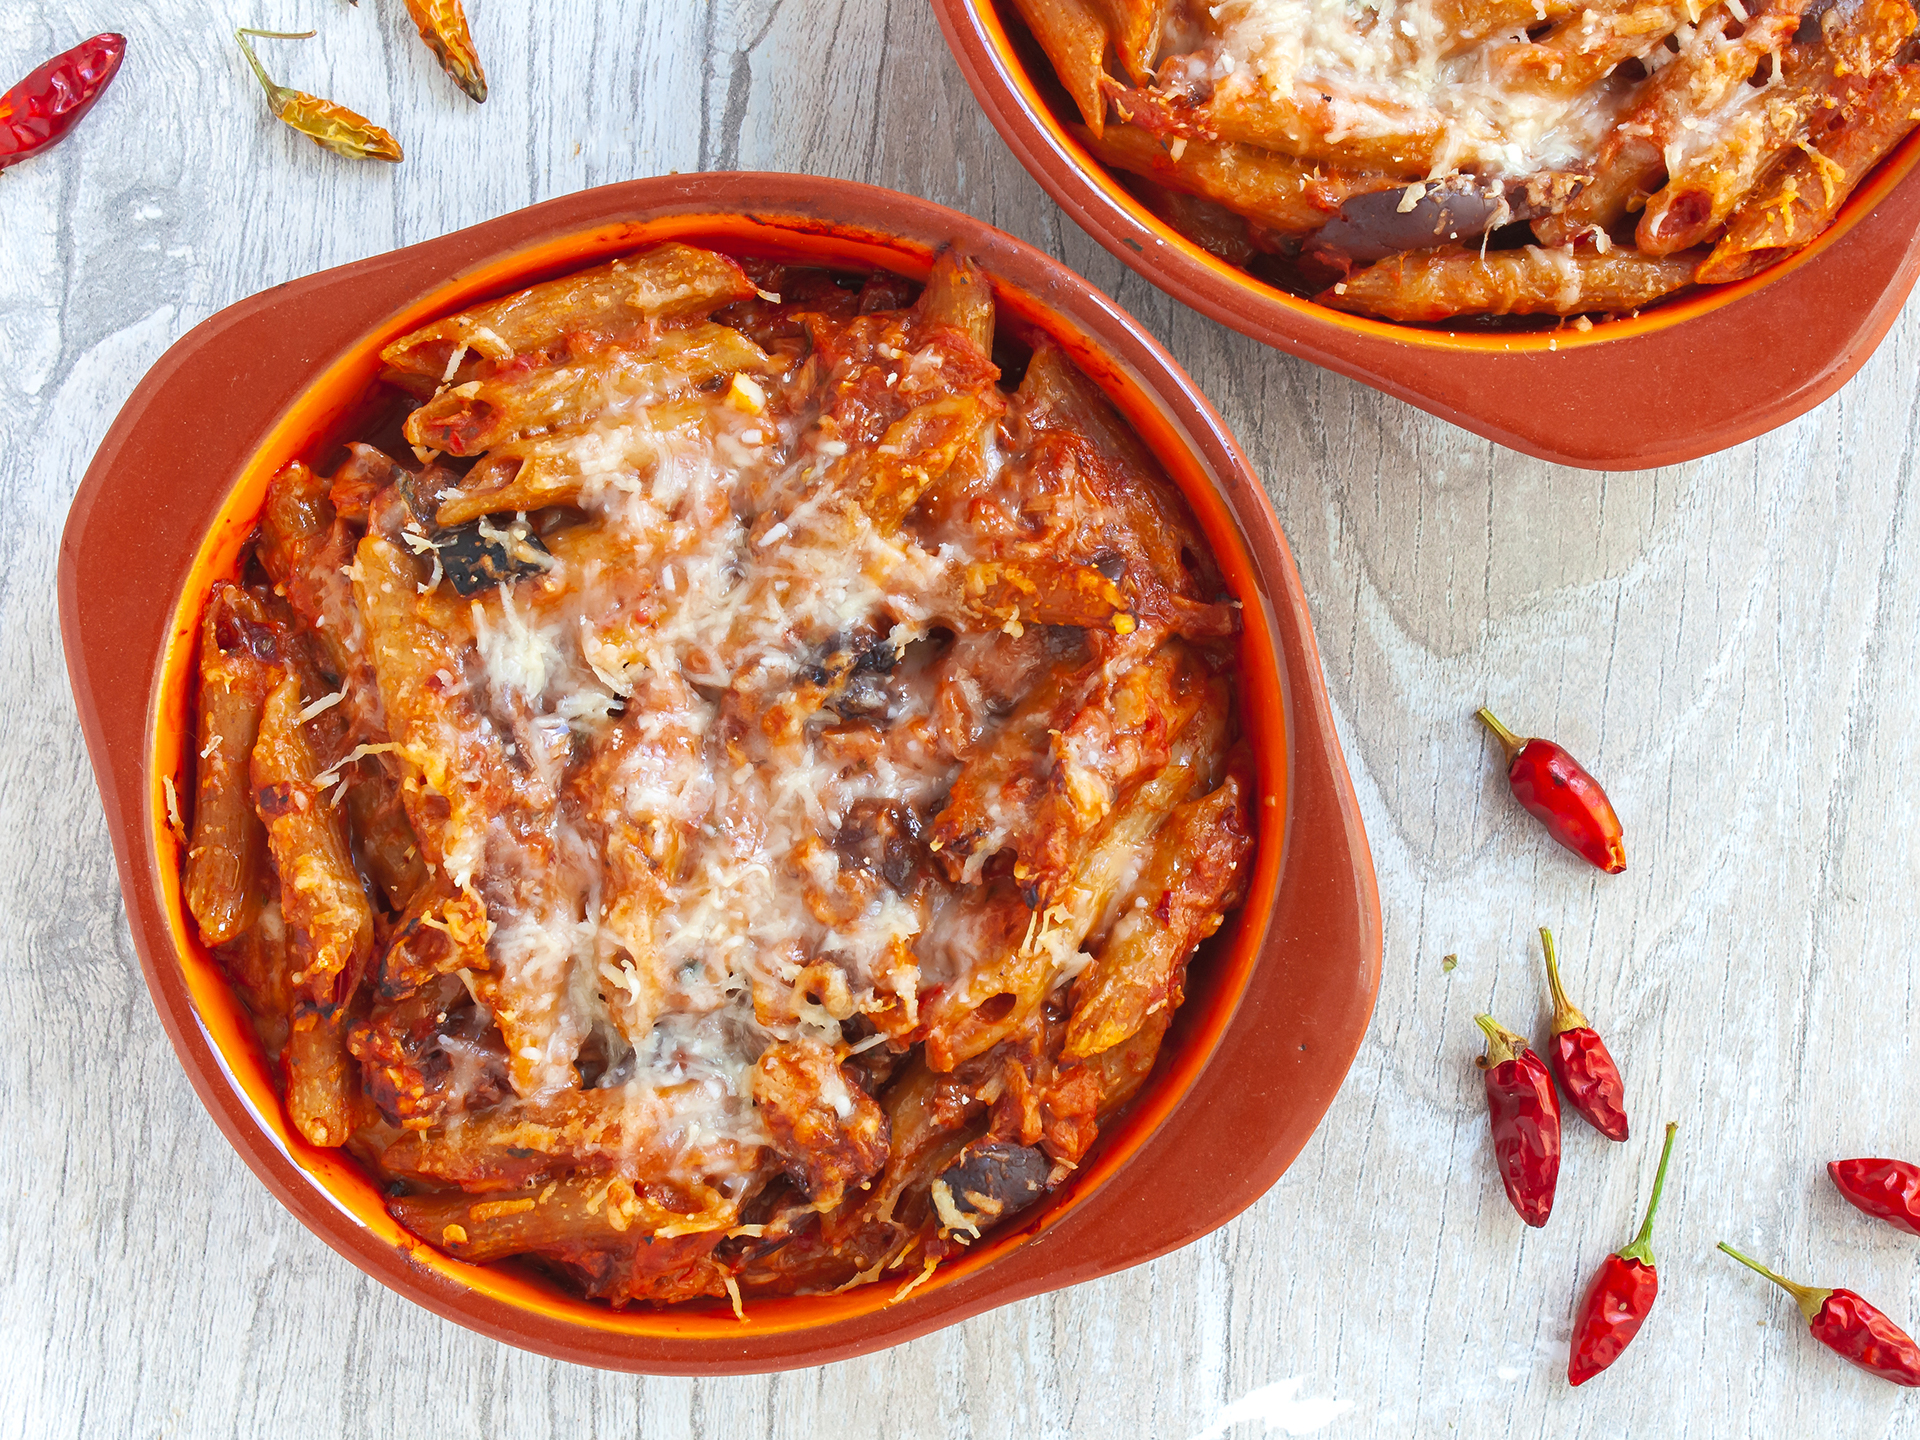 Spicy Tuna and Tomato Pasta Bake with Black Olives 